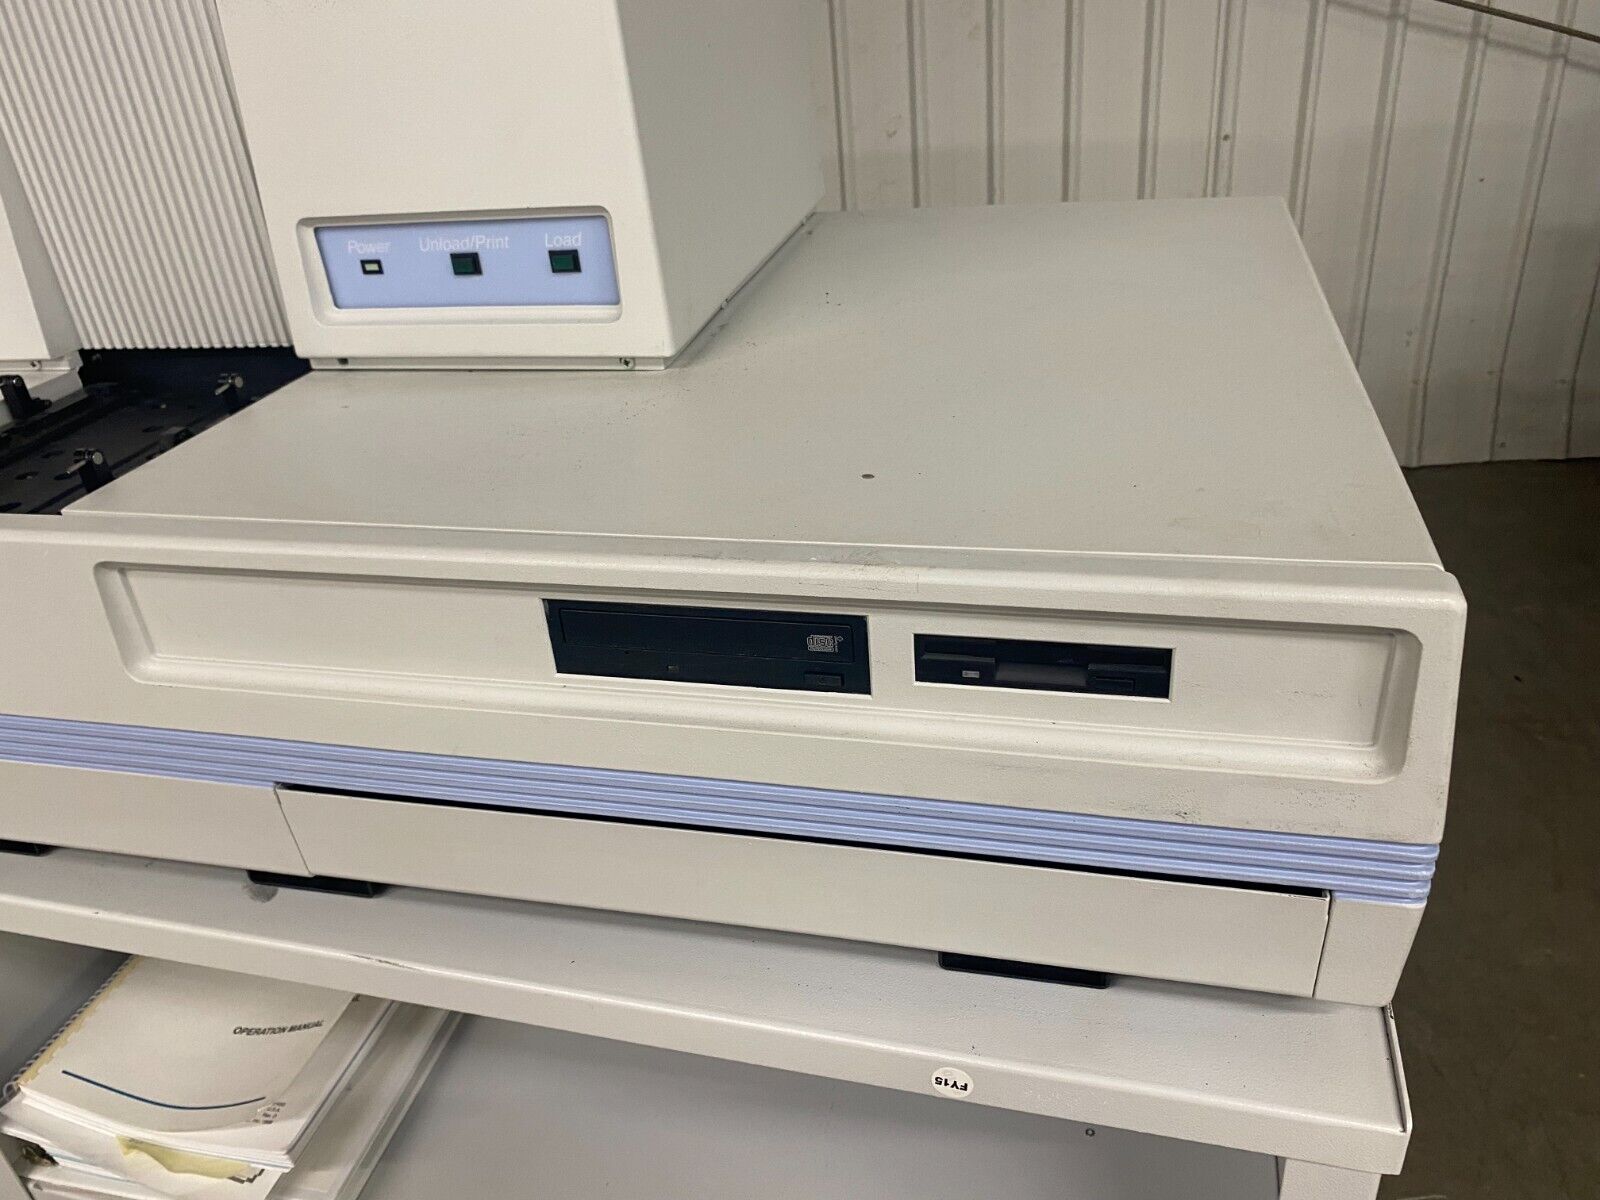 Perkin Elmer TopCount NXT HTS Microplate Scintillation Counter w Cooling Cabinet